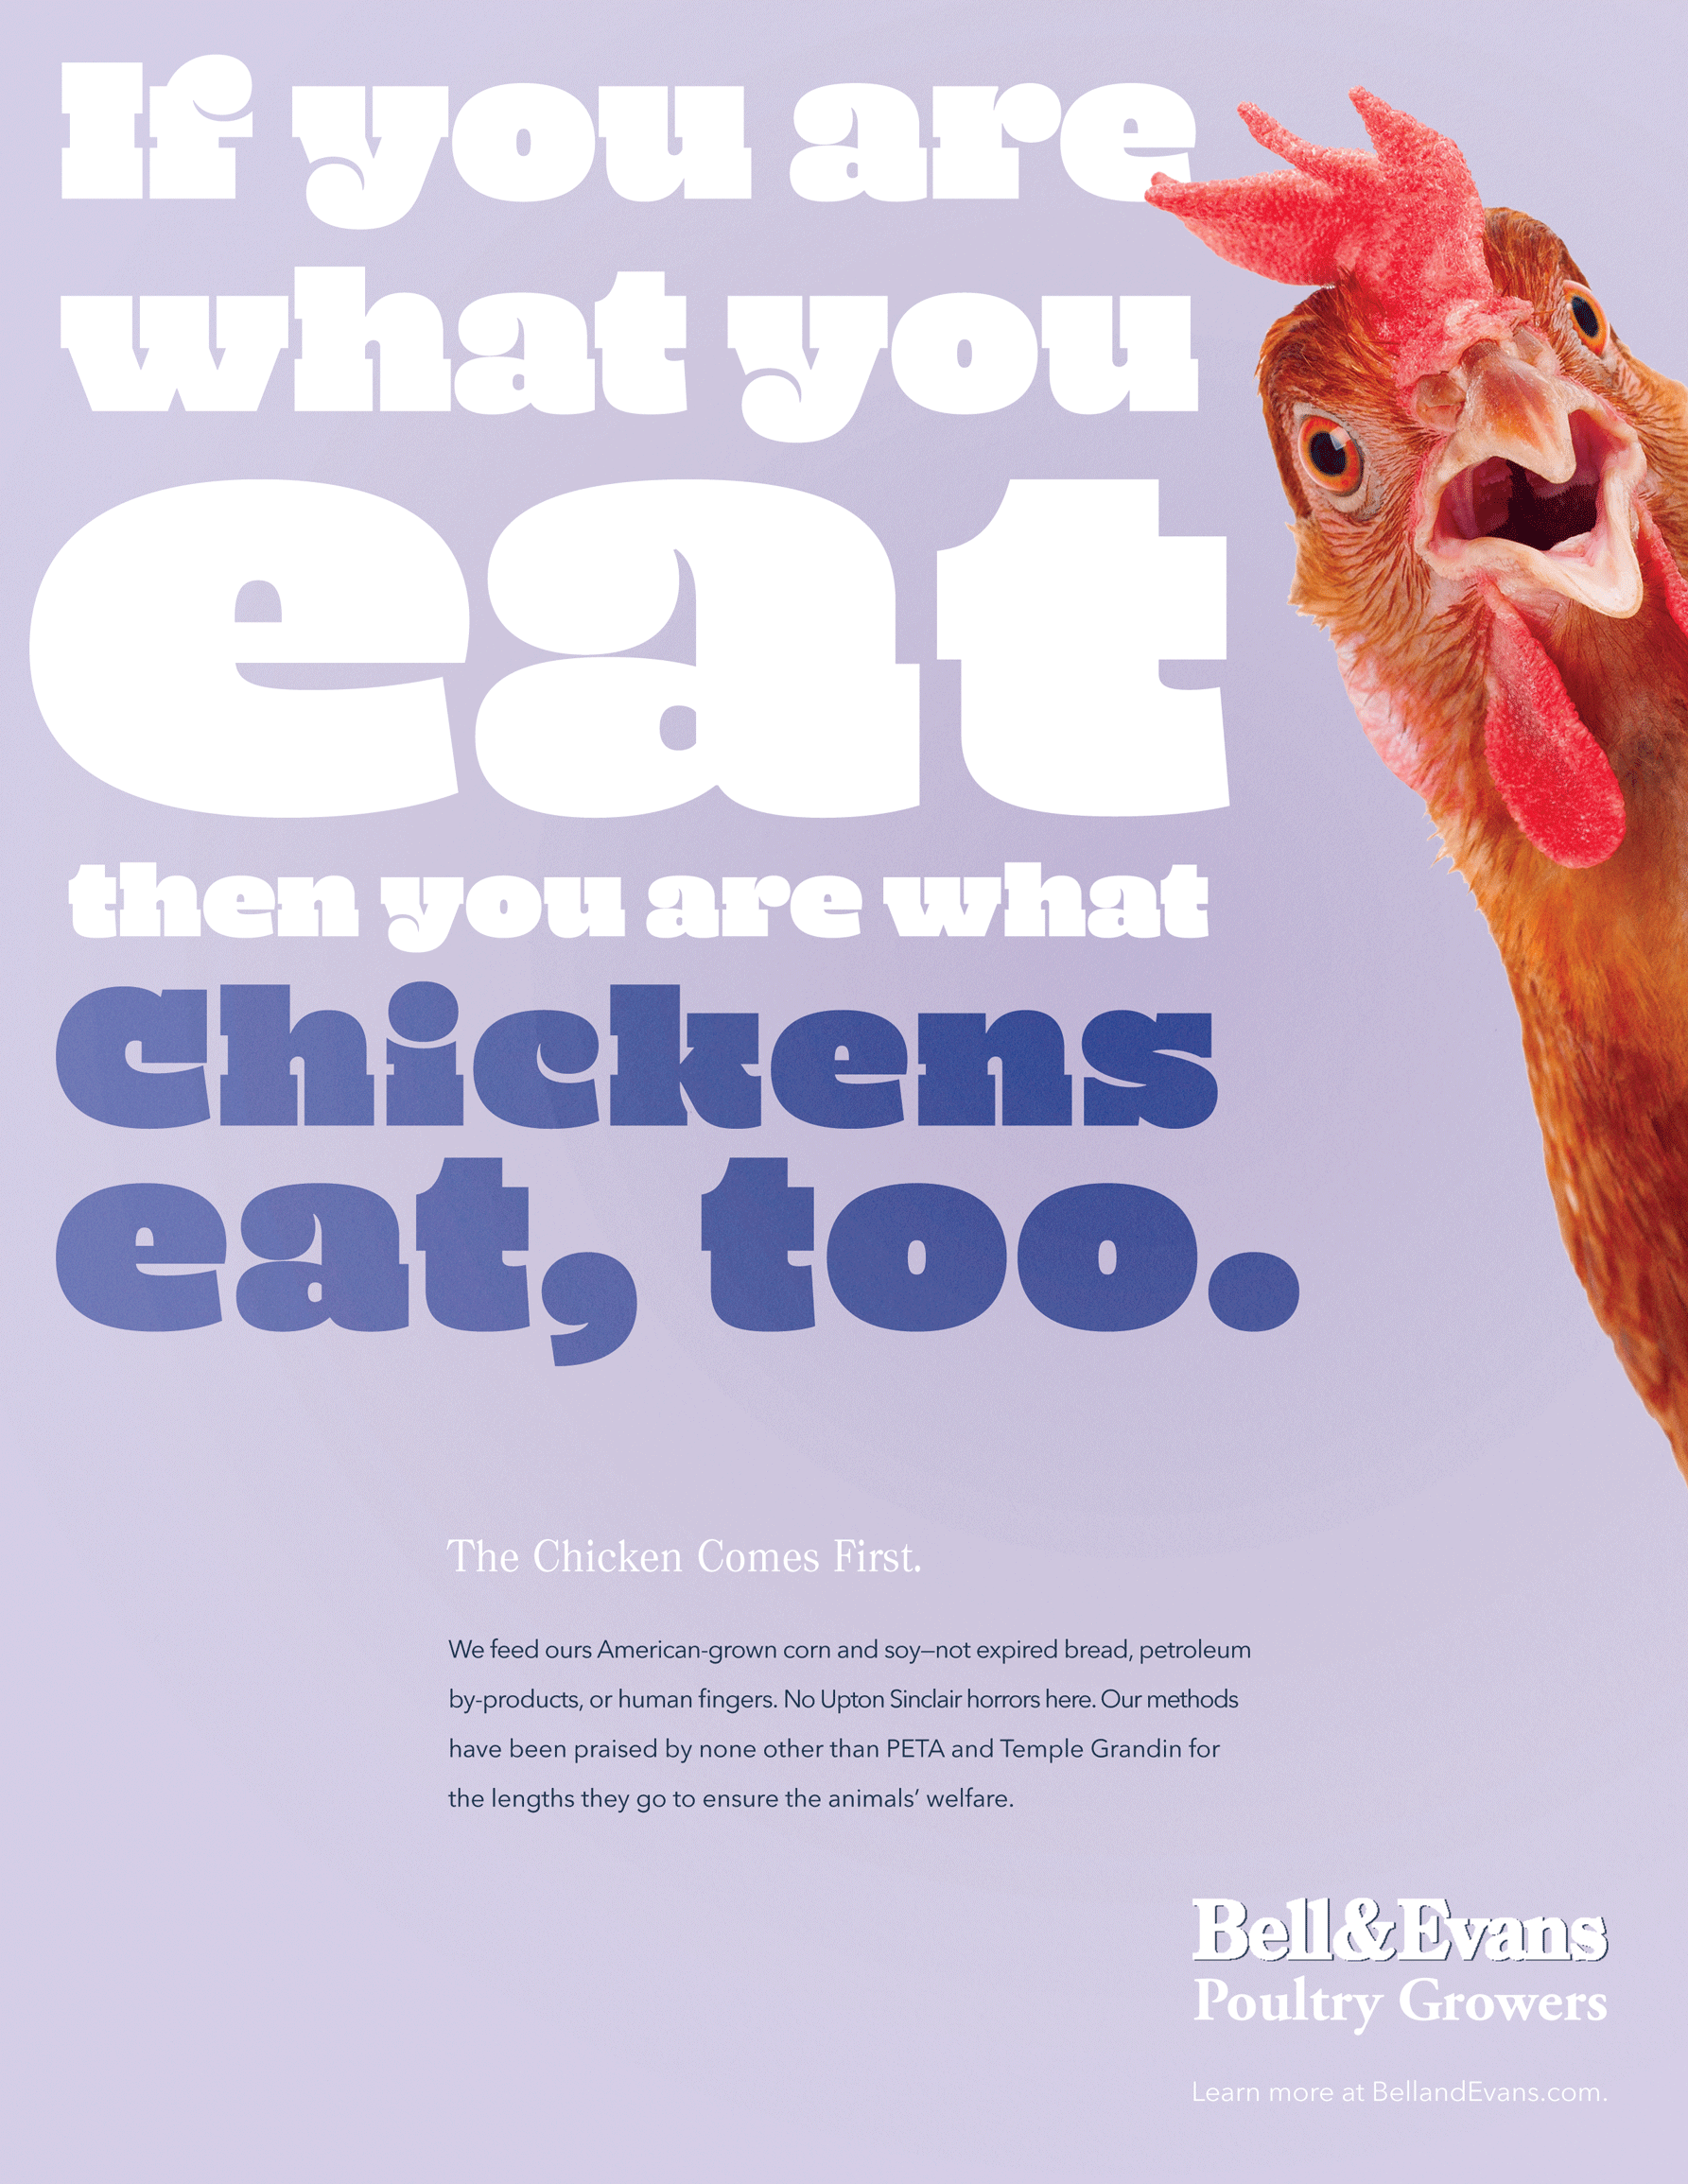 If you are what you eat, then you are what chickens eat, too.